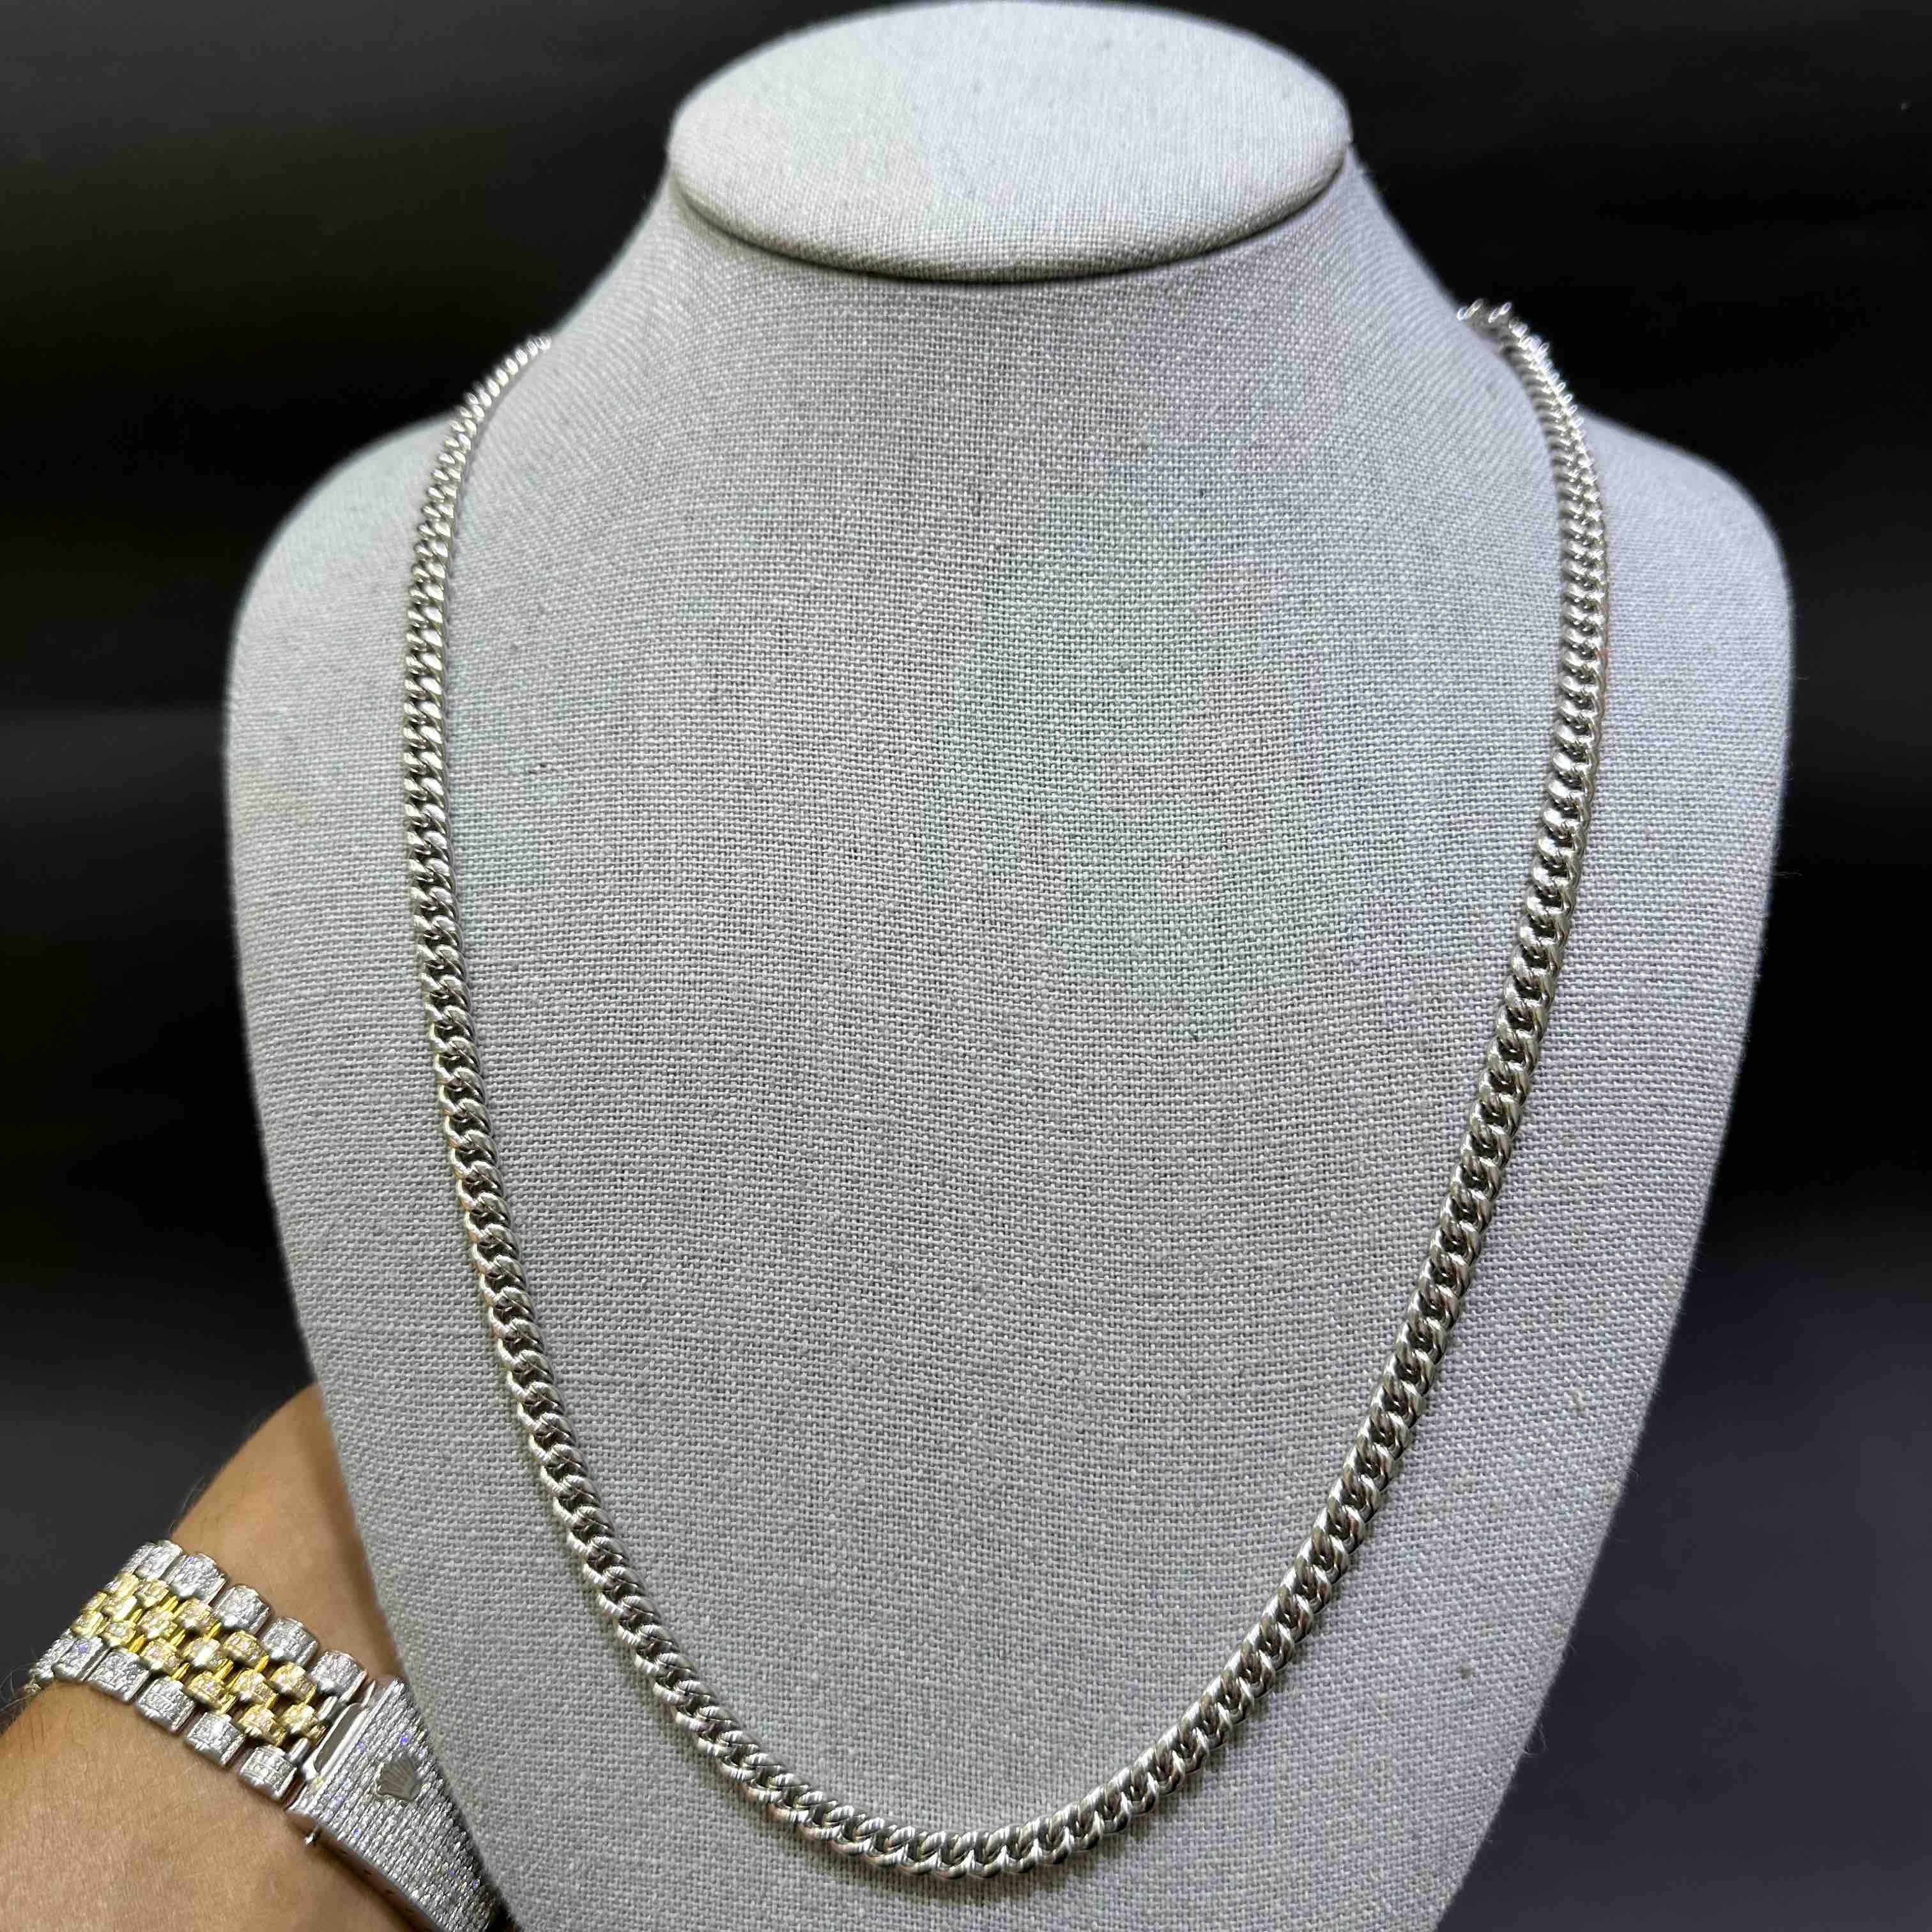 Cuban Link Chain Available in 20-24 Inches